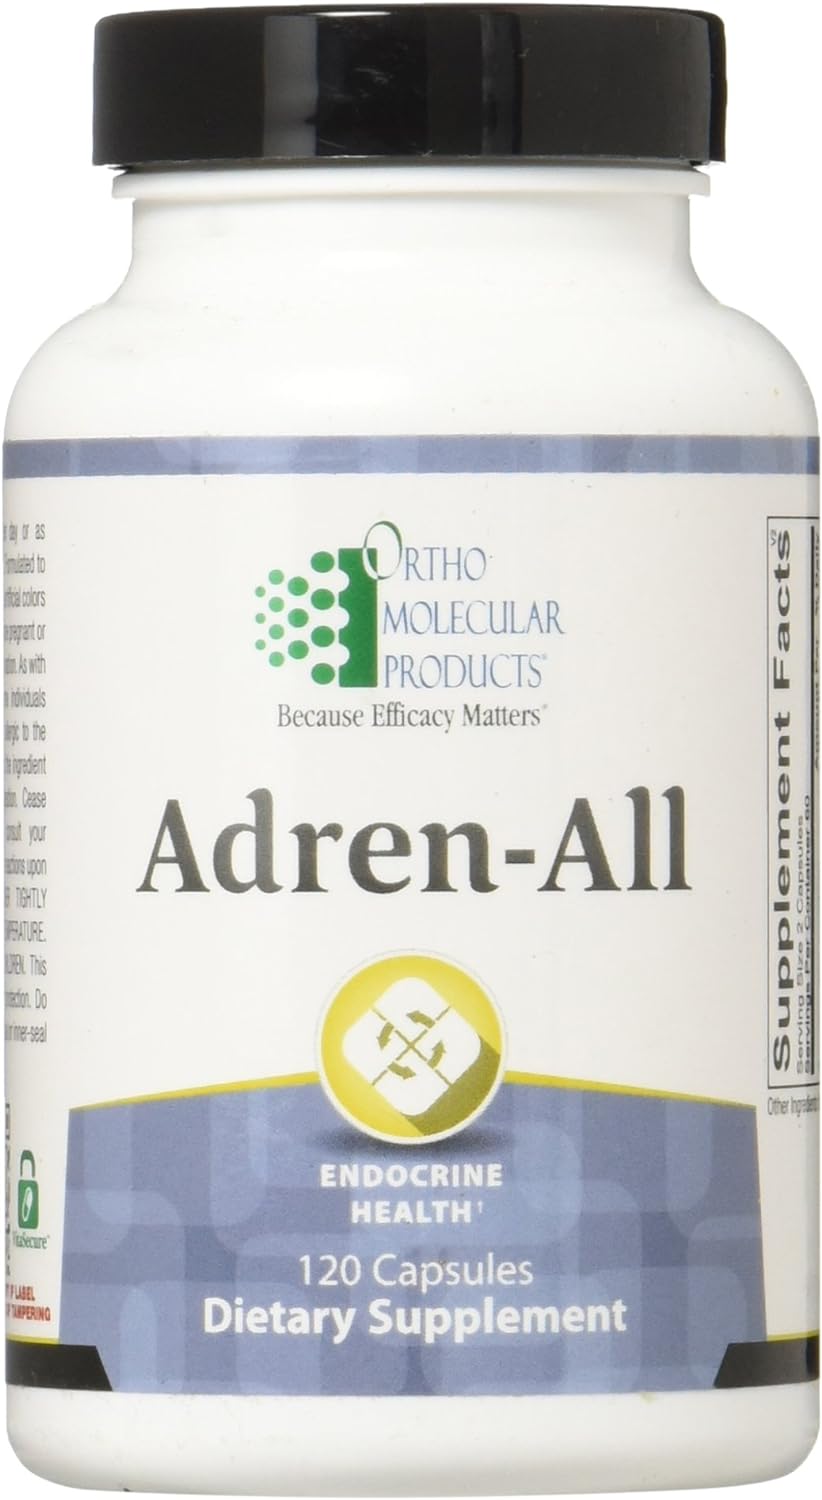 Ortho Molecular Products Adren-All Capsules, 120 Count3.2 Ounces